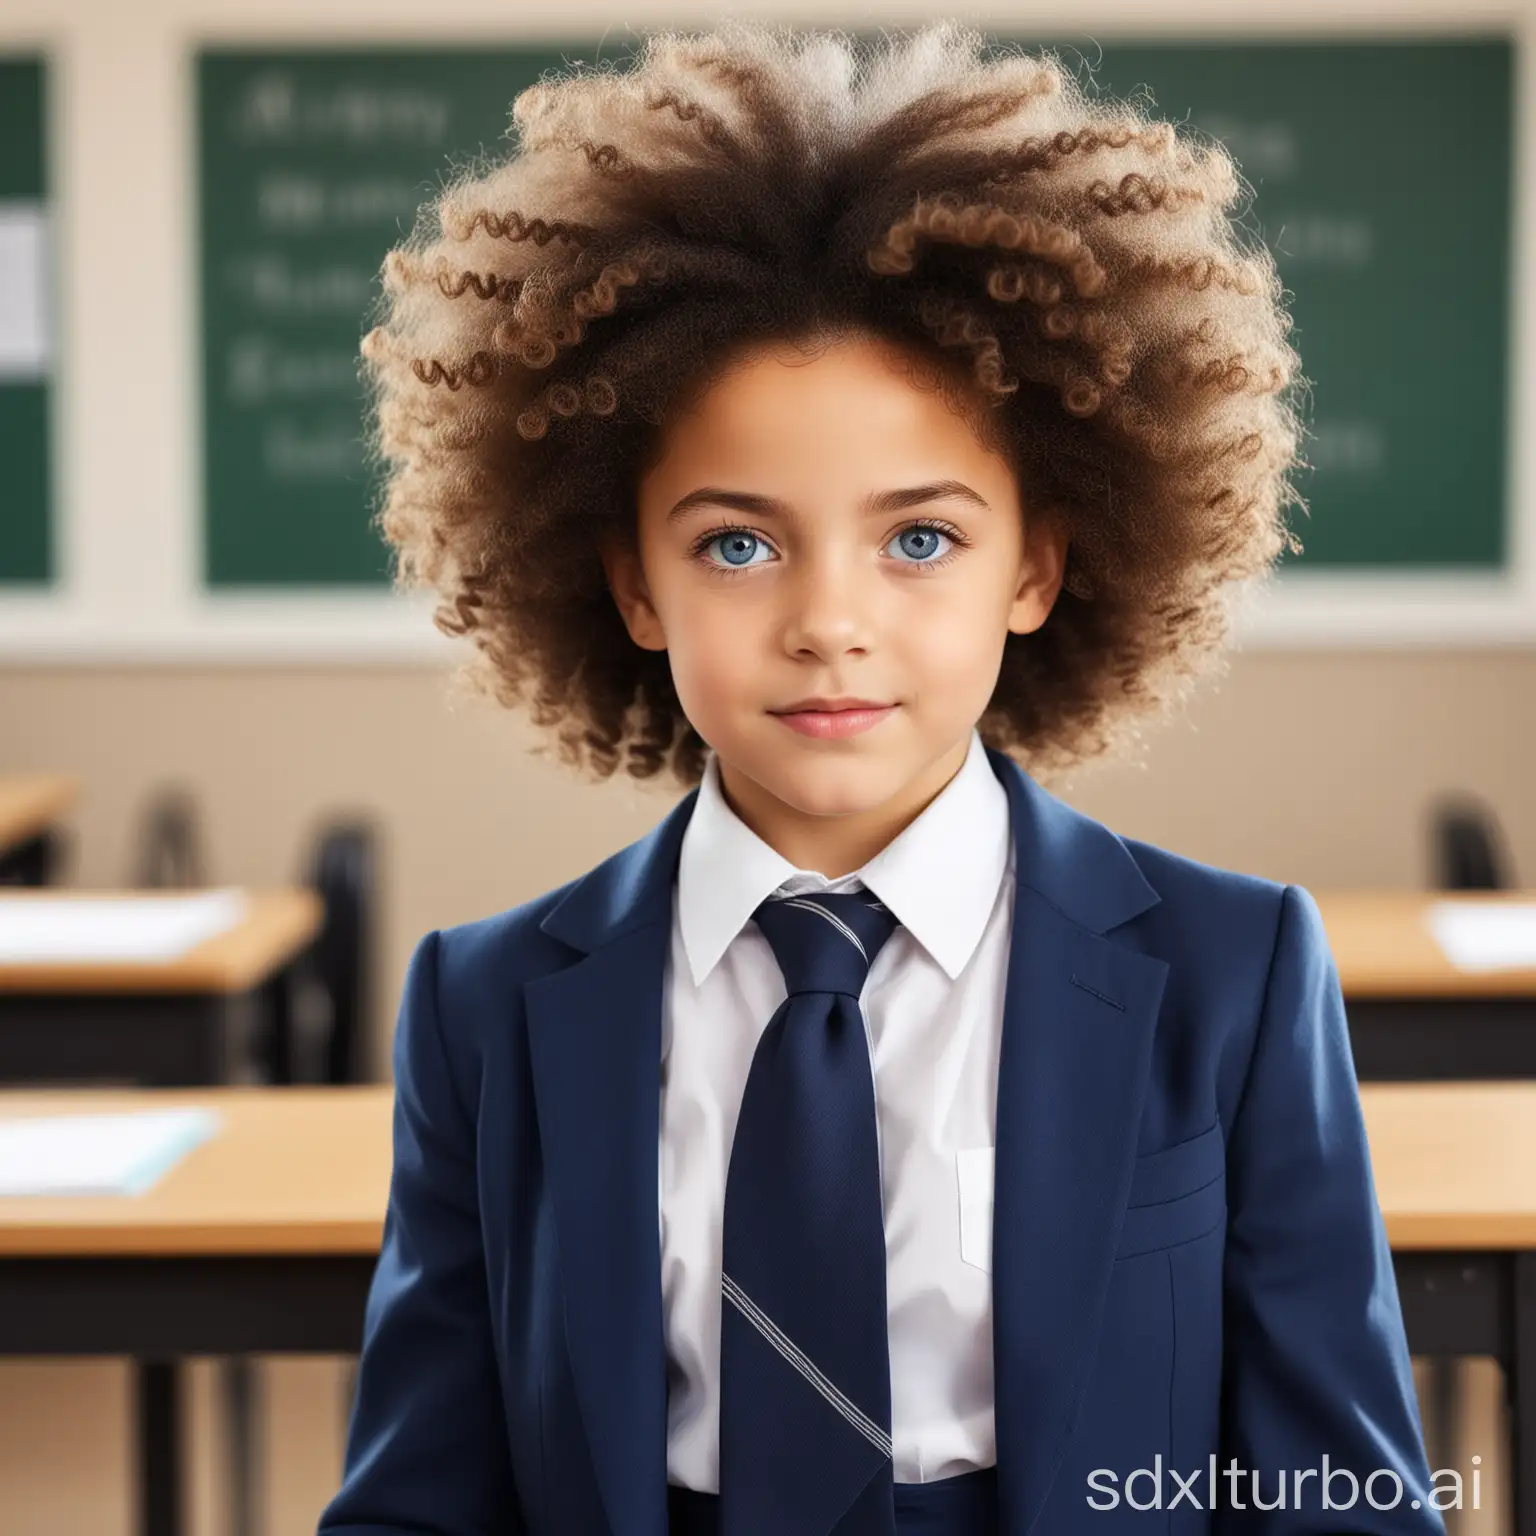 Adorable-7YearOld-Student-in-Blue-Uniform-Learning-in-Classroom